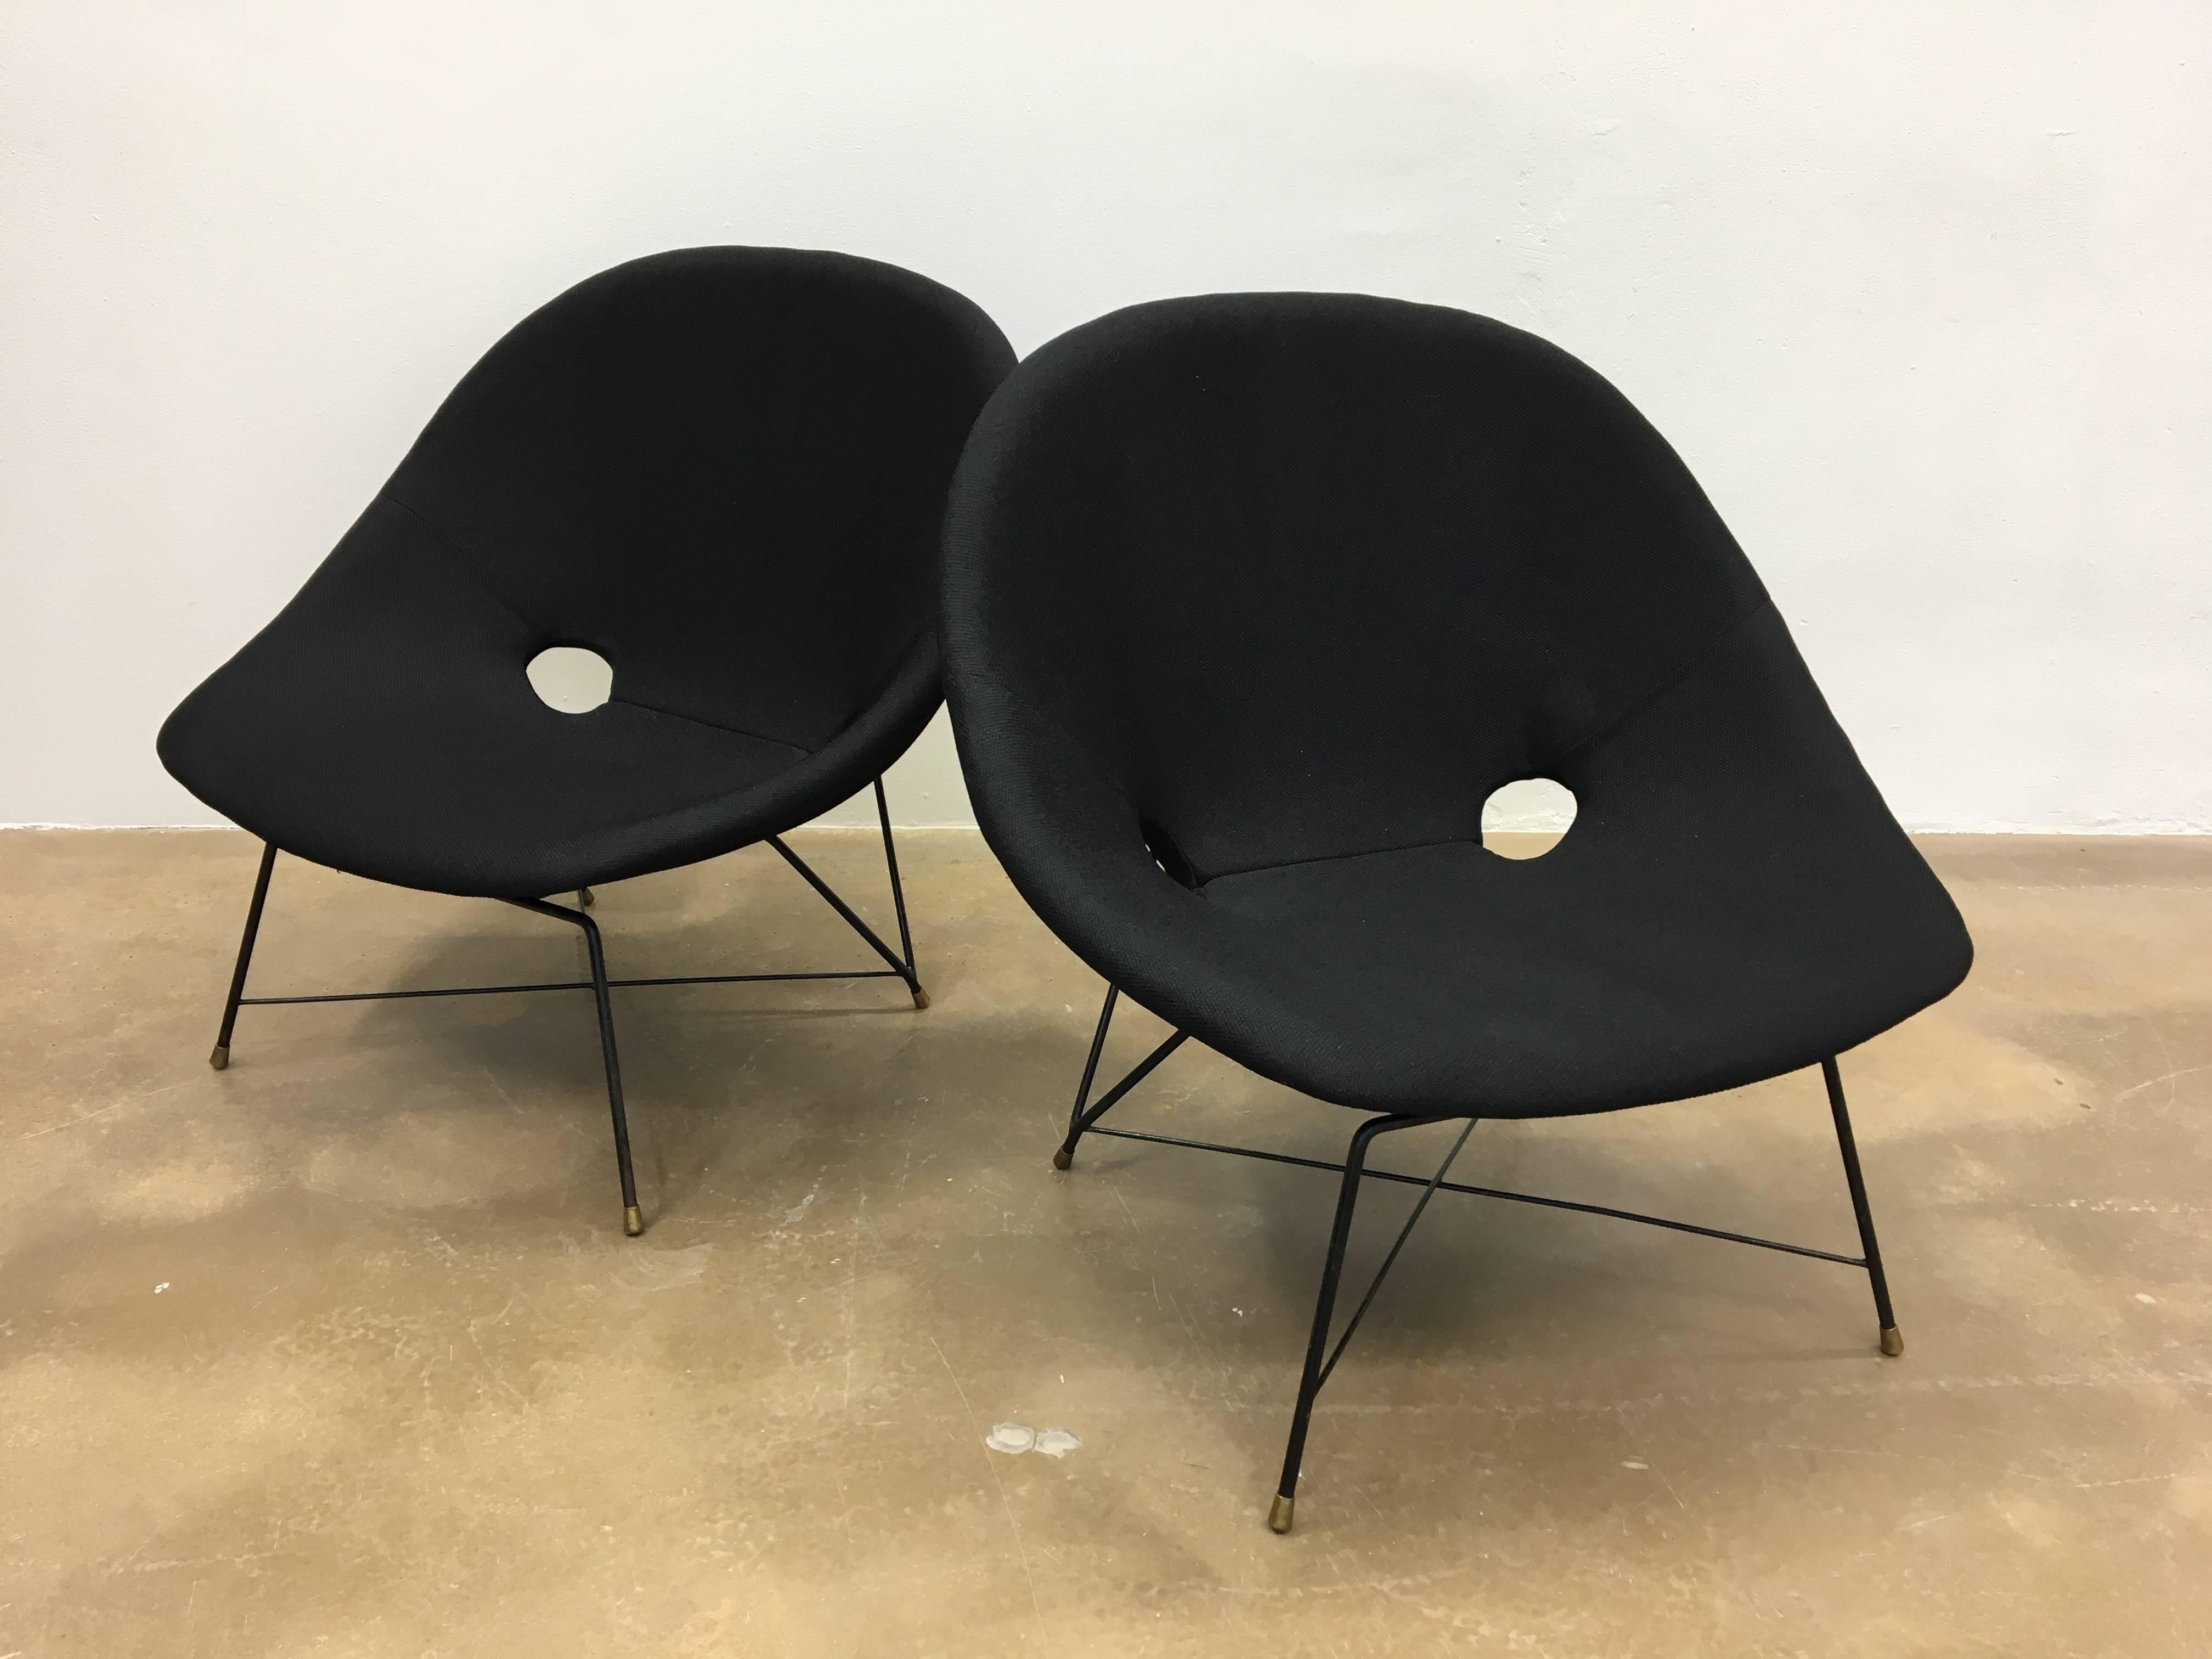 A pair of rare Cosmos lounge chairs designed by Augusto Bozzi for Saporiti Italia, Italy, 1954. These chairs have a black lacquered metal wire frame with solid brass feet. The chairs are newly upholstered so they are in excellent condition.